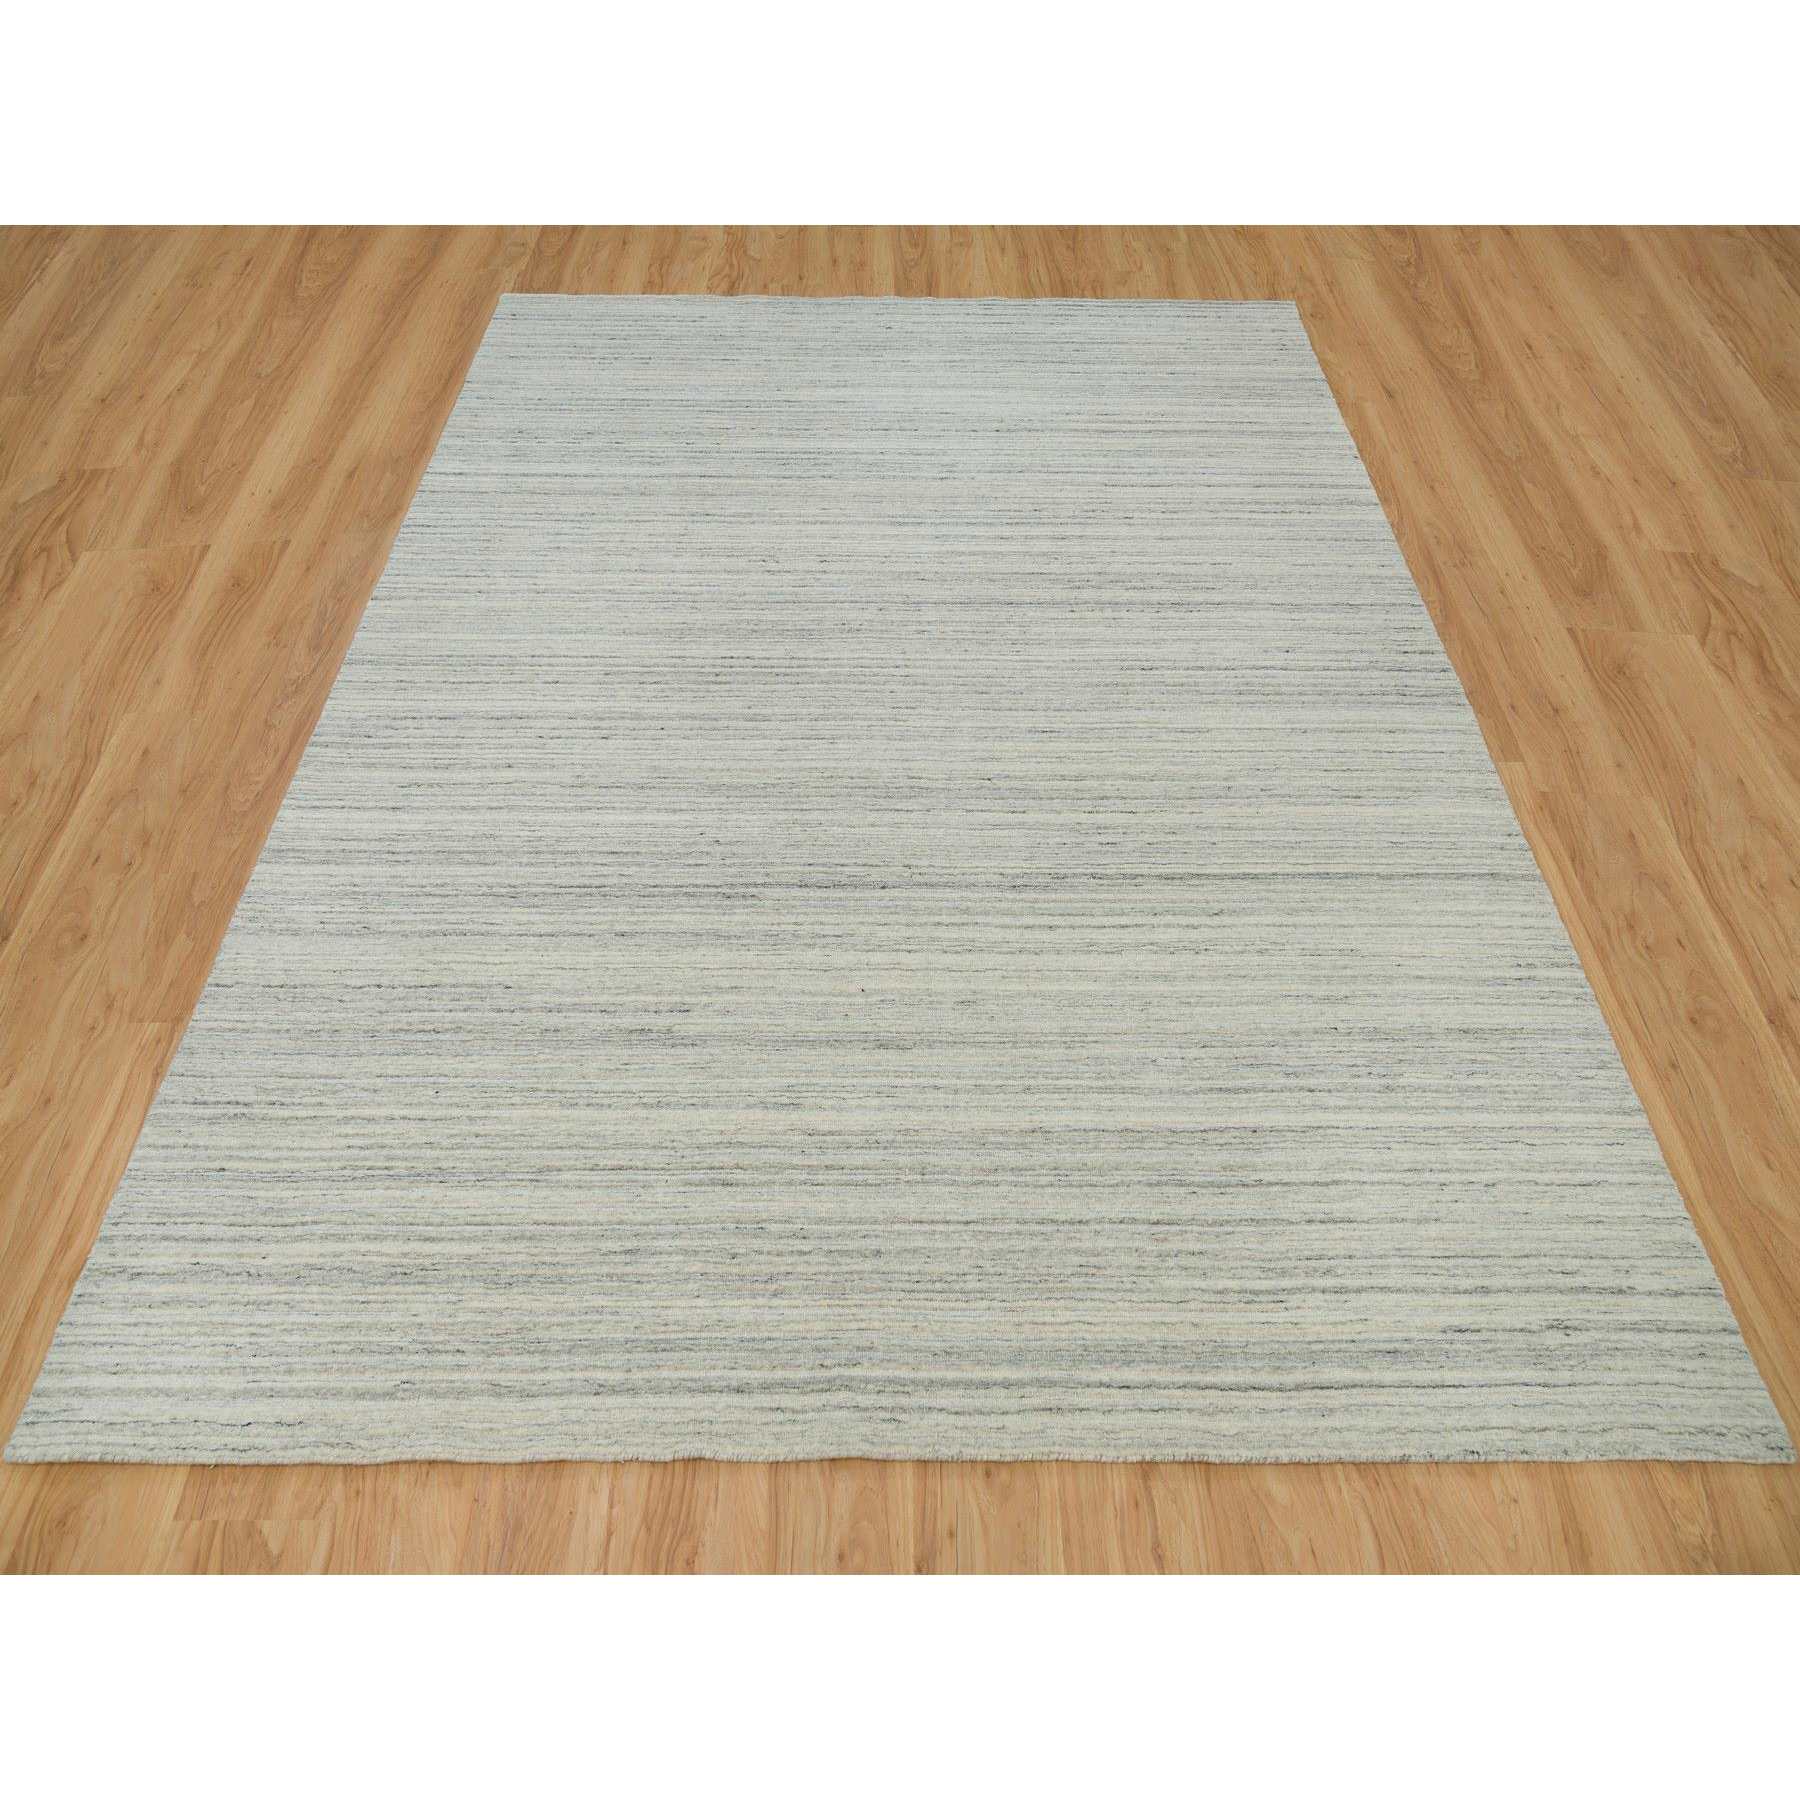 Modern-and-Contemporary-Hand-Loomed-Rug-450620